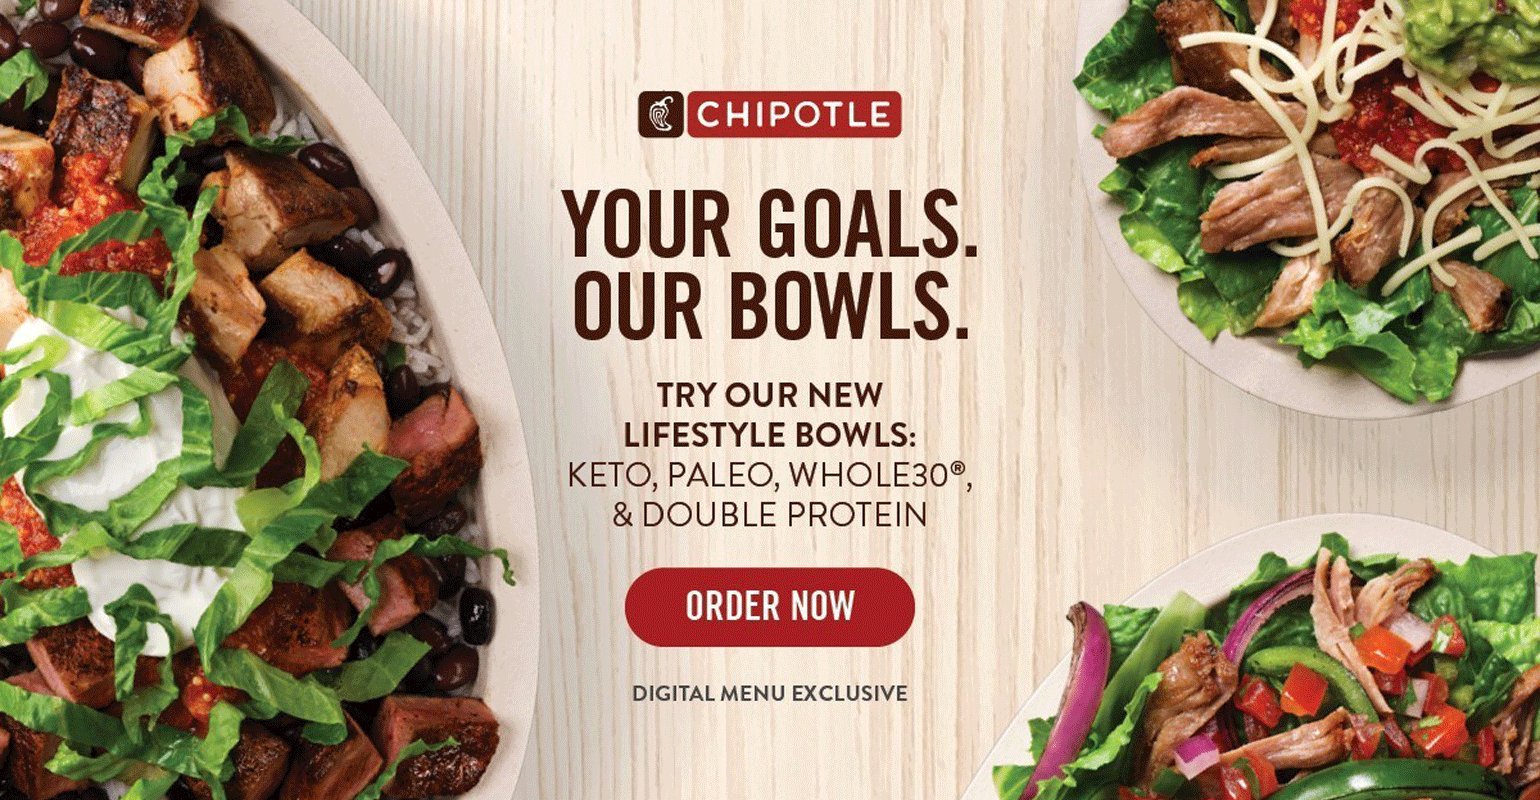 Chipotle adds ‘Lifestyle Bowls’ for paleo, keto, Whole30 dieters